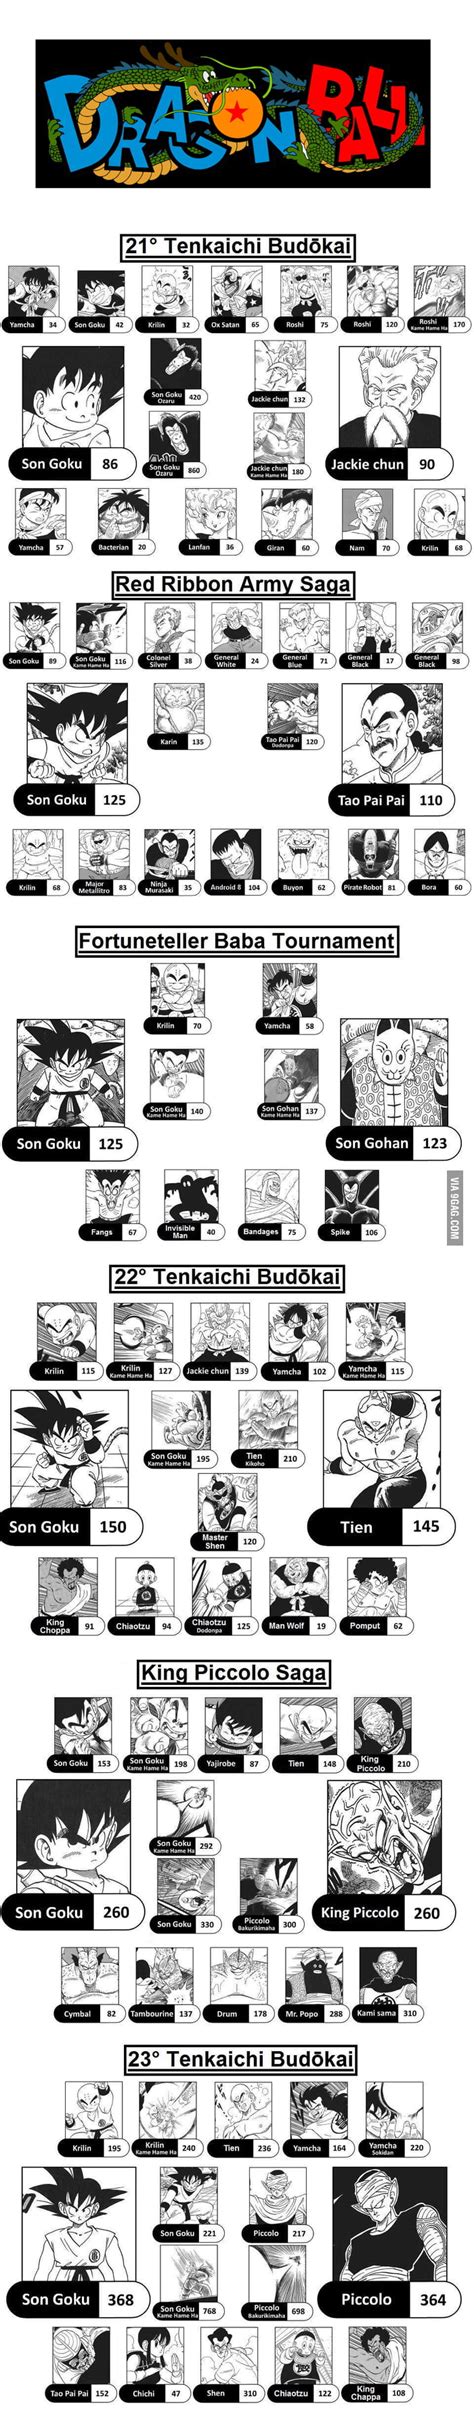 As fans know, the evil wizard babidi has the ability to possess fighters with inklings of darkness in their hearts, which is exactly what he did. DRAGON BALL - Characters power level (Part I) - 9GAG